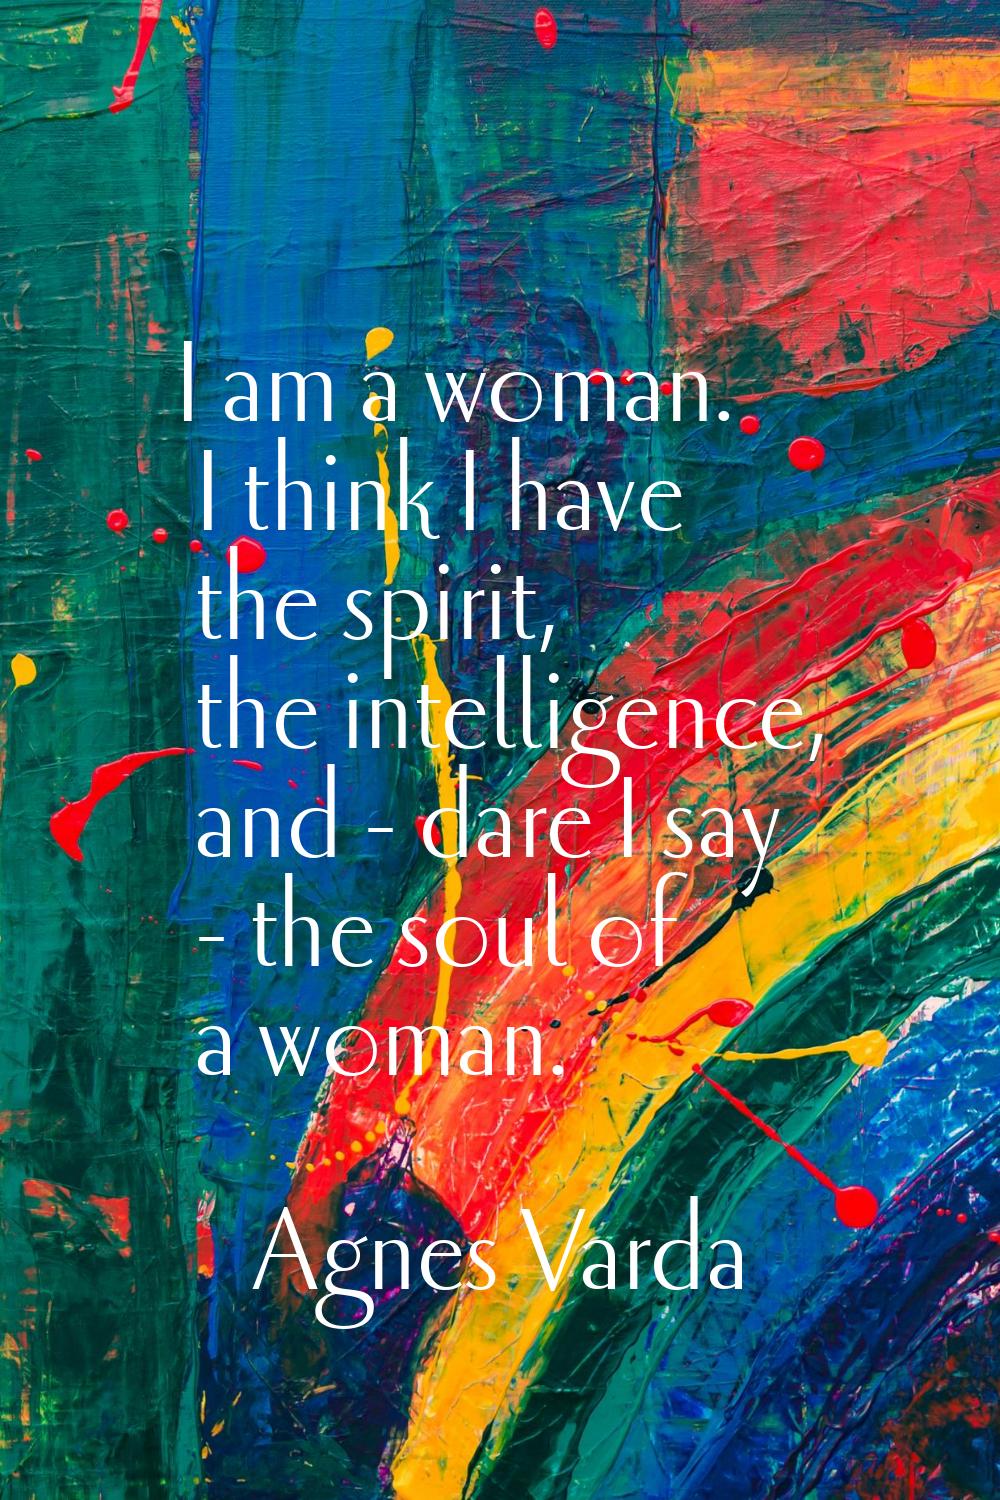 I am a woman. I think I have the spirit, the intelligence, and - dare I say - the soul of a woman.